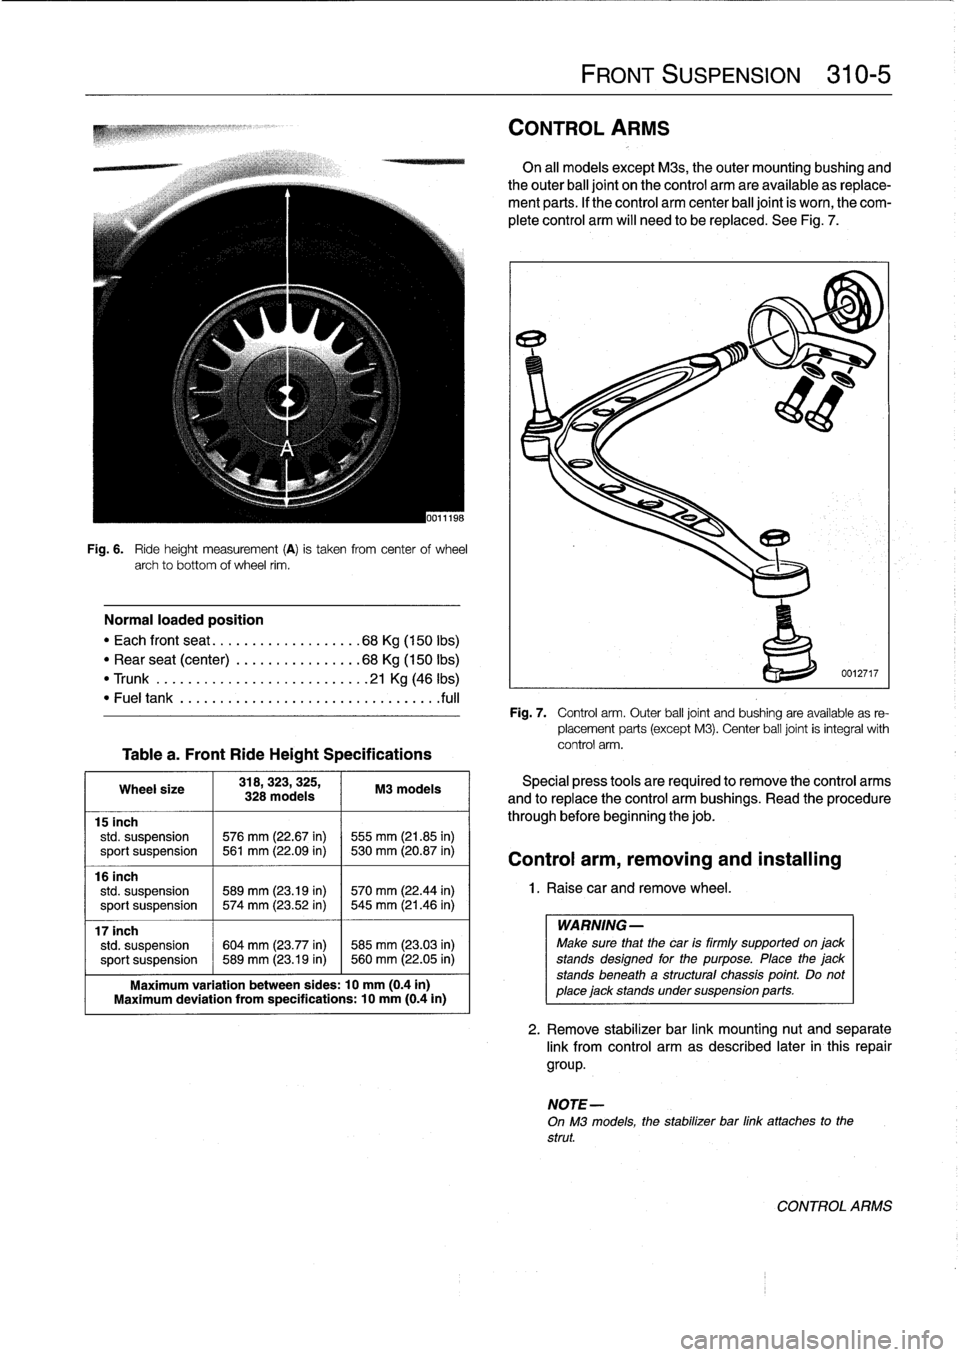 BMW 318i 1996 E36 Workshop Manual 
Fig
.
6
.

	

Ride
height
measurement
(A)
is
taken
from
centerof
wheel
archto
bottom
of
wheel
rim
.

Normal
loaded
position

"
Each
front
seat
...
...
.
..
..........
68Kg
(150
Ibs)

"
Rear
seat
(cen